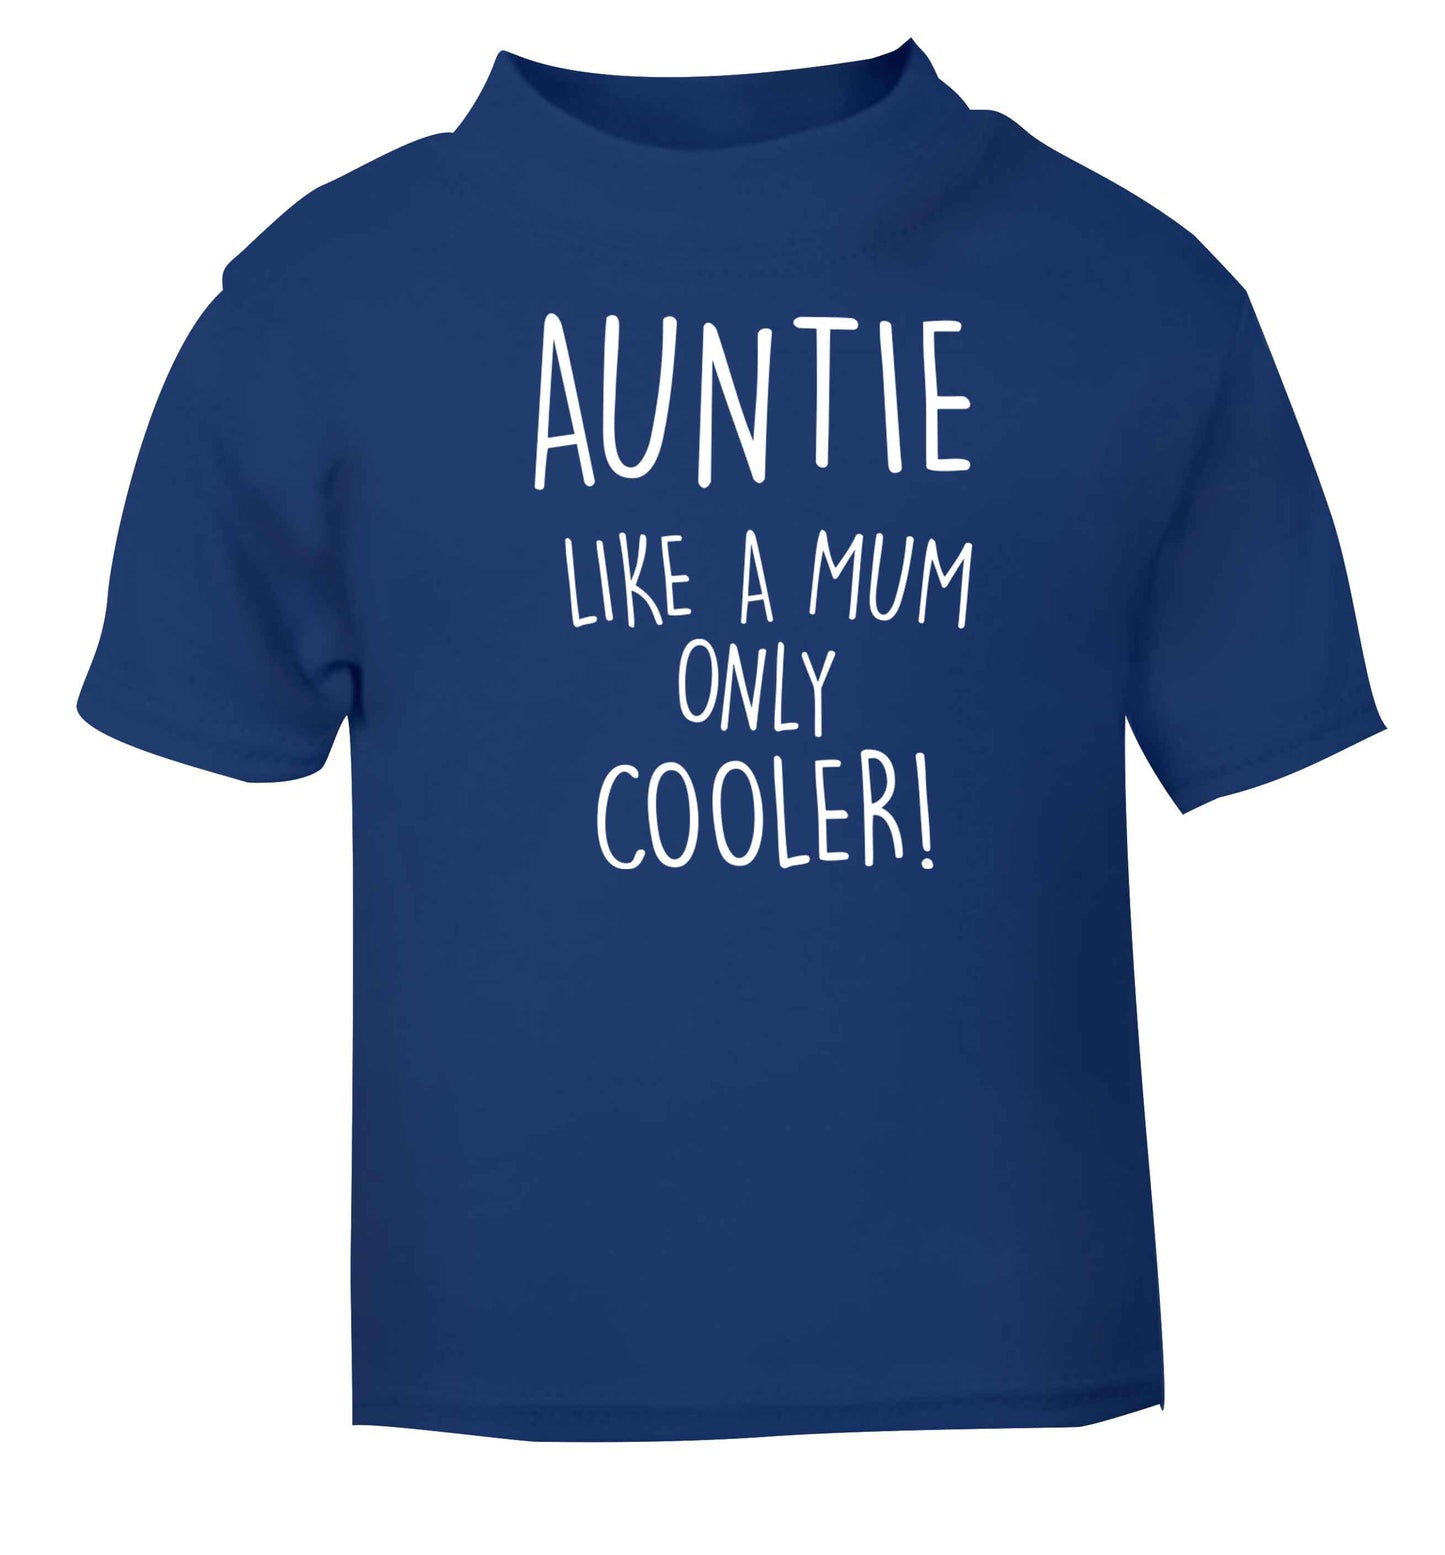 Auntie like a mum only cooler blue baby toddler Tshirt 2 Years